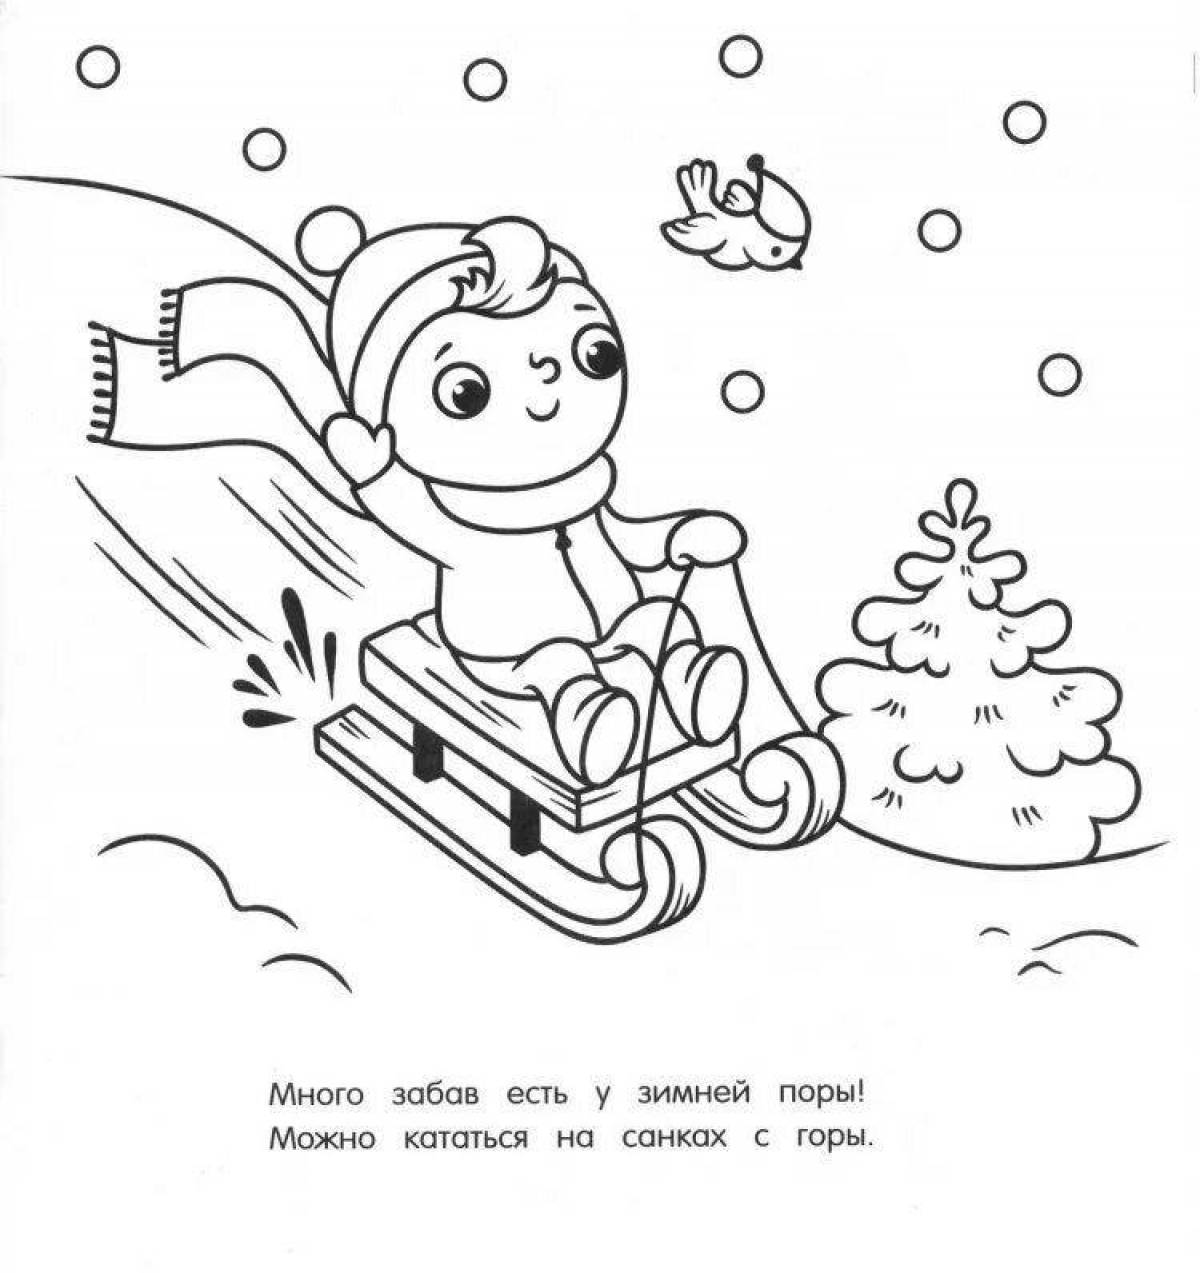 Coloring page of a joyful child on a sled